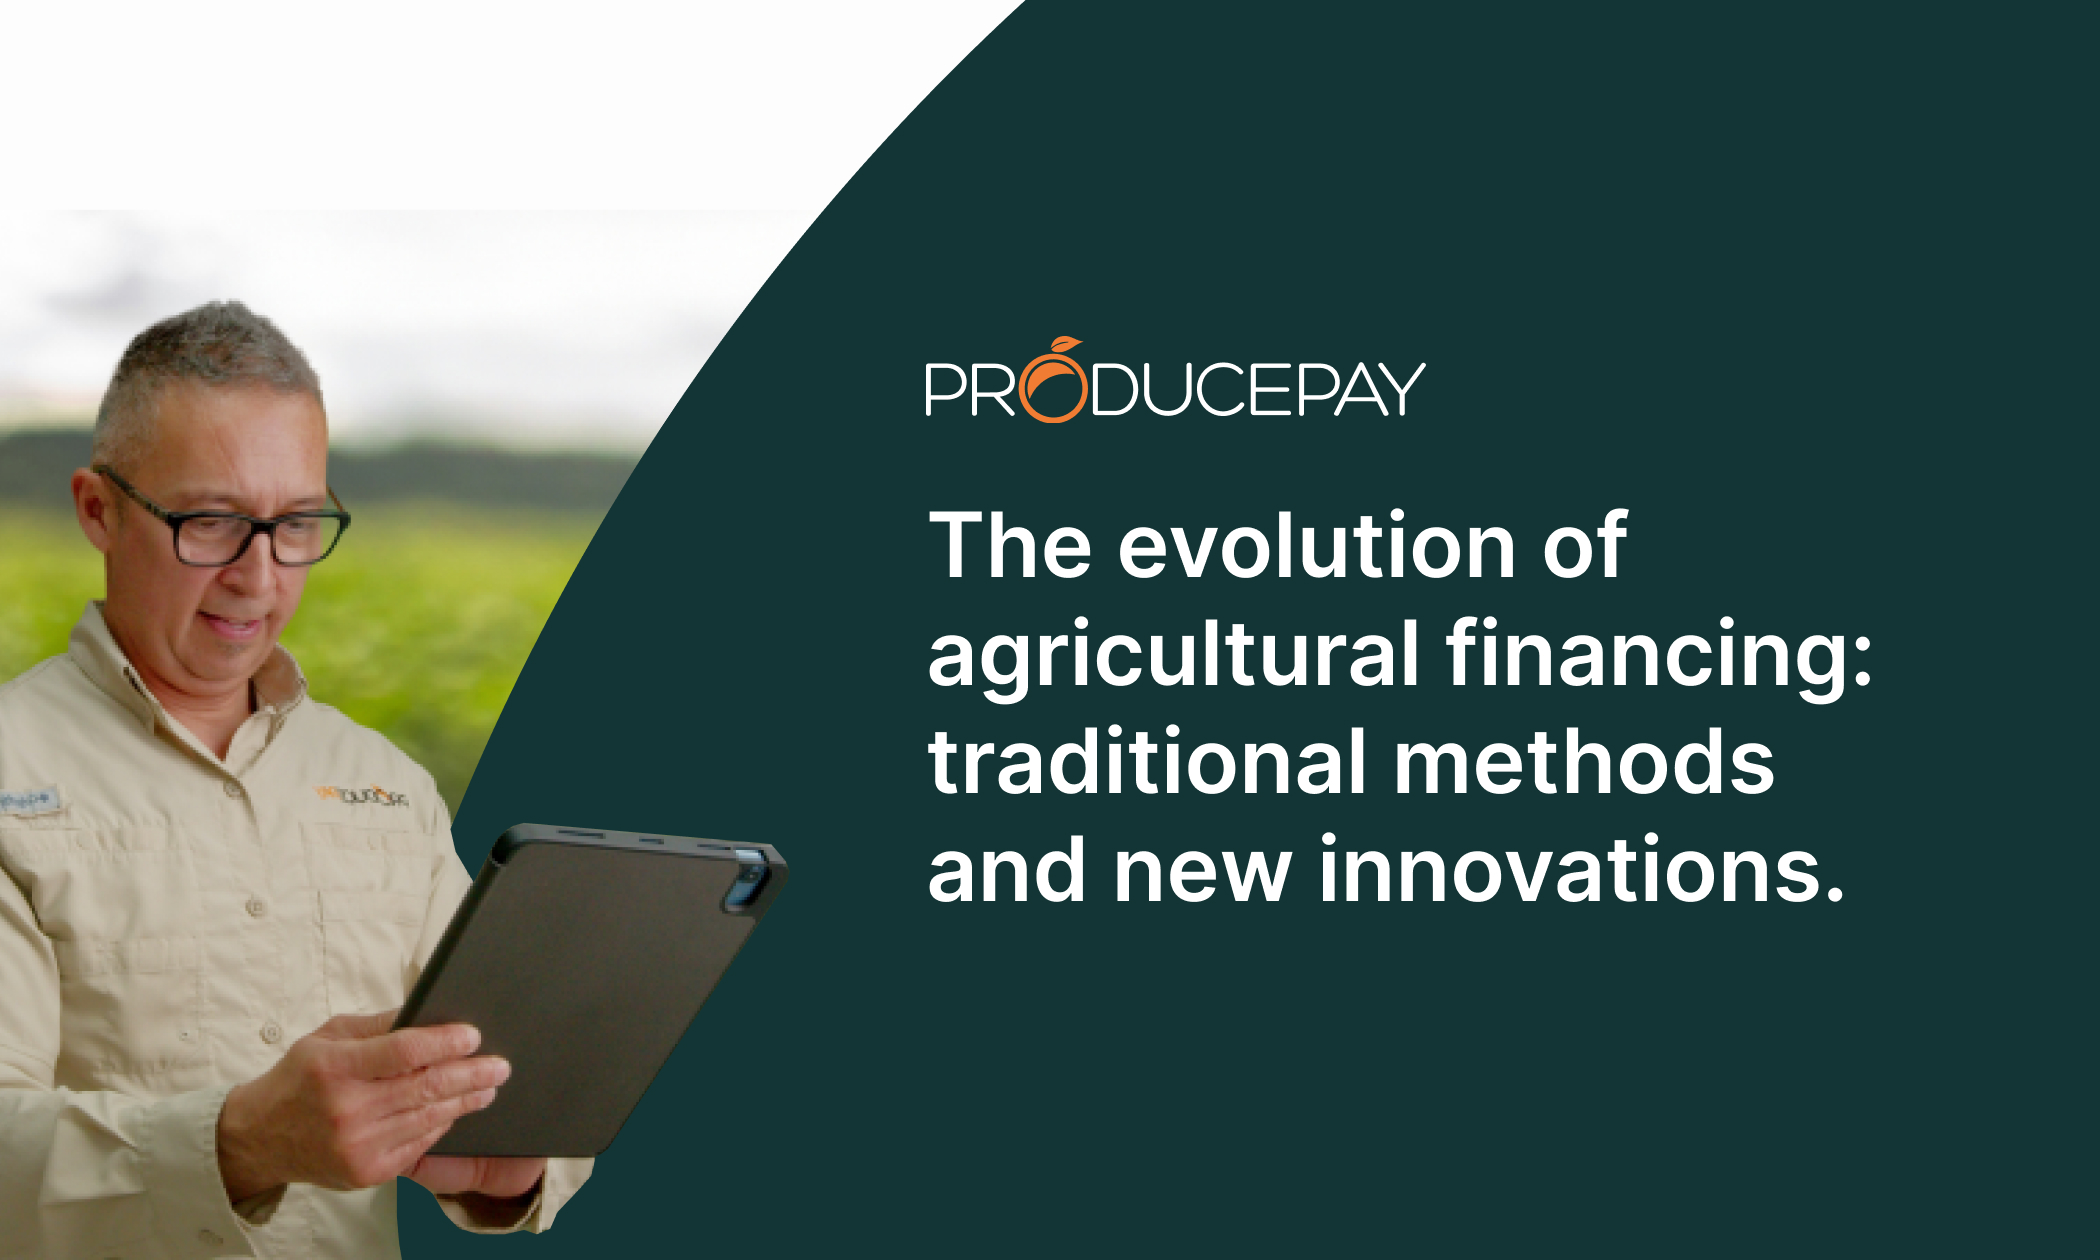 The evolution of agricultural financing: traditional methods and new innovations